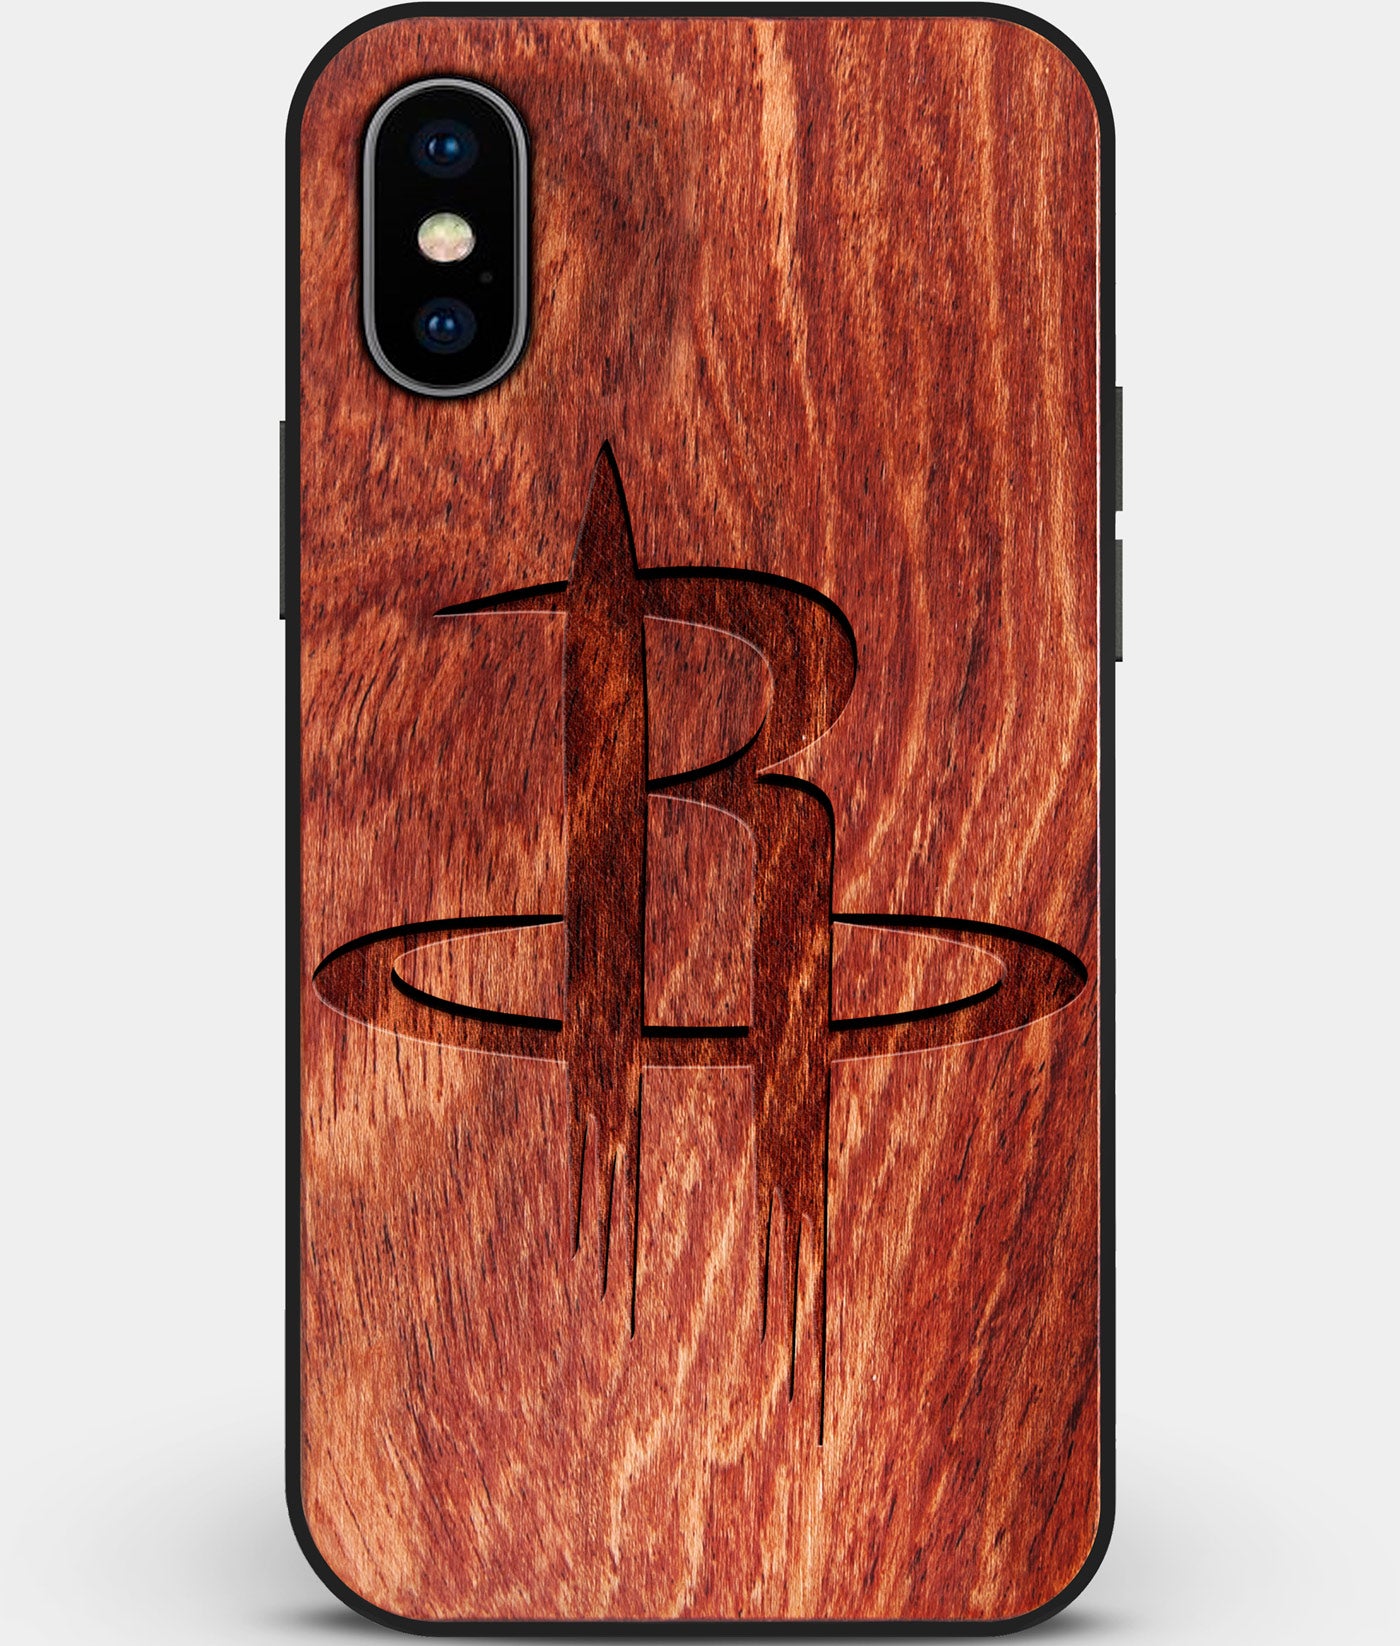 Custom Carved Wood Houston Rockets iPhone X/XS Case | Personalized Mahogany Wood Houston Rockets Cover, Birthday Gift, Gifts For Him, Monogrammed Gift For Fan | by Engraved In Nature